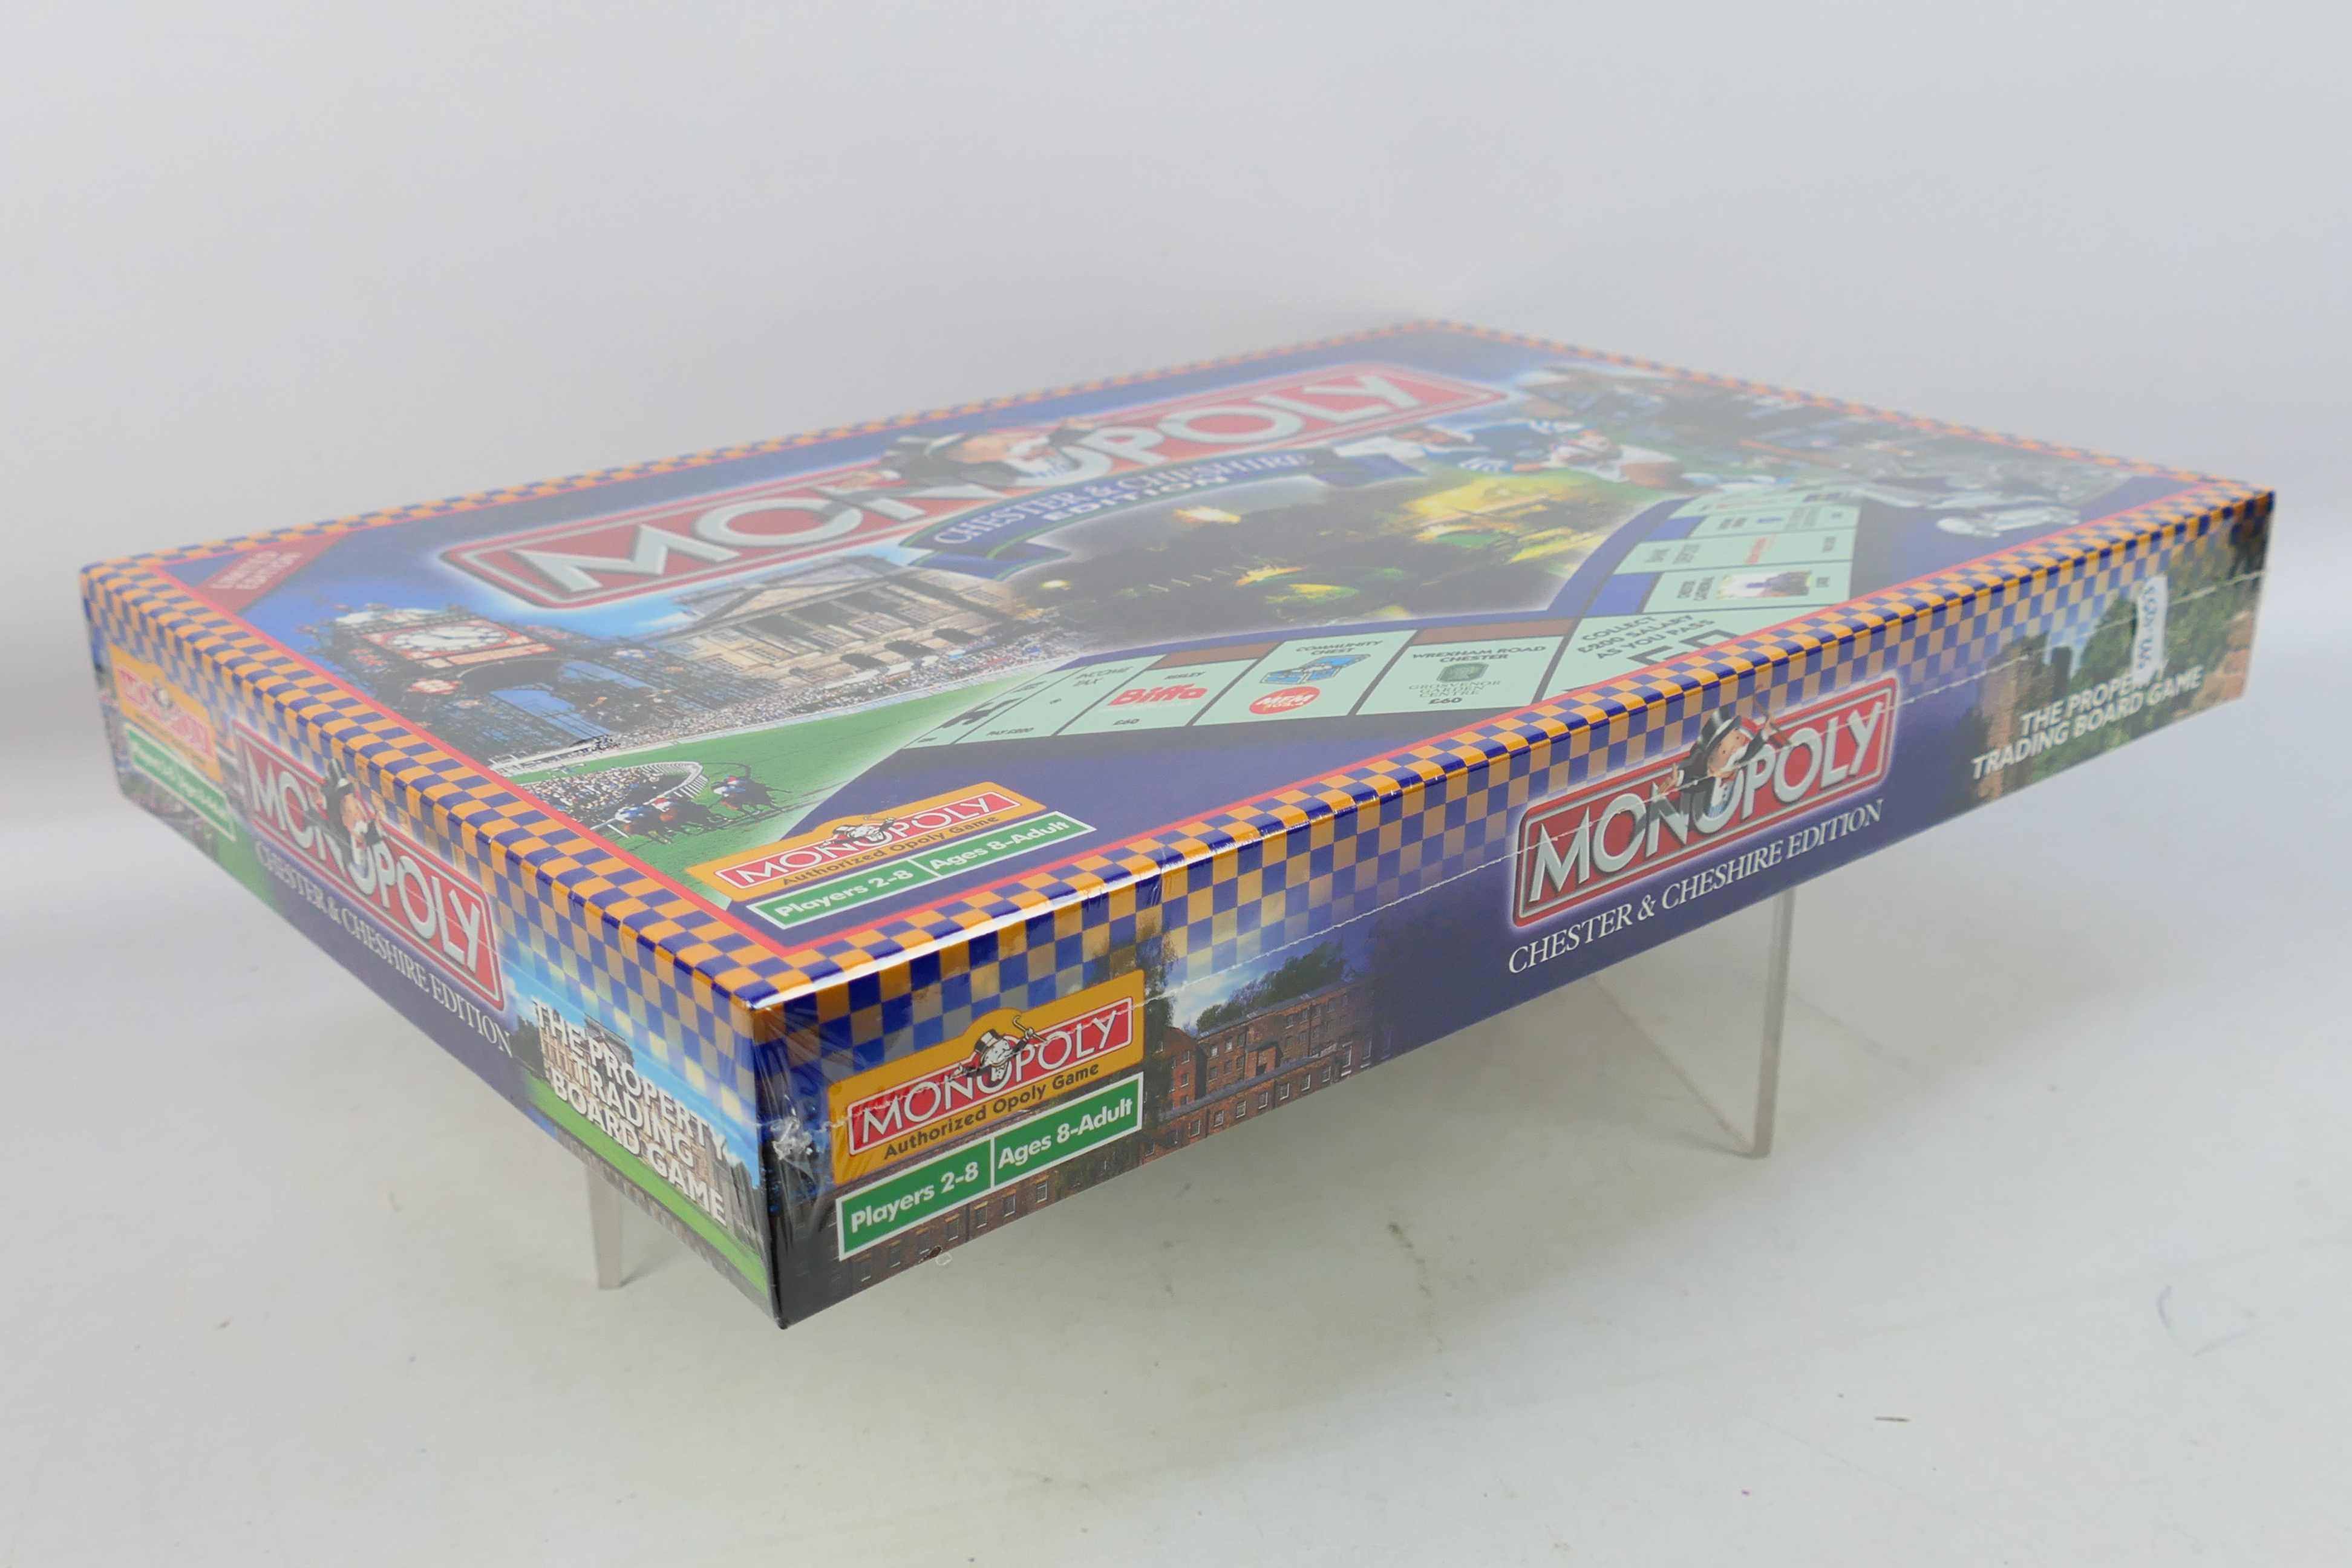 Hasbro - Monopoly - An unopened Chester - Image 3 of 3